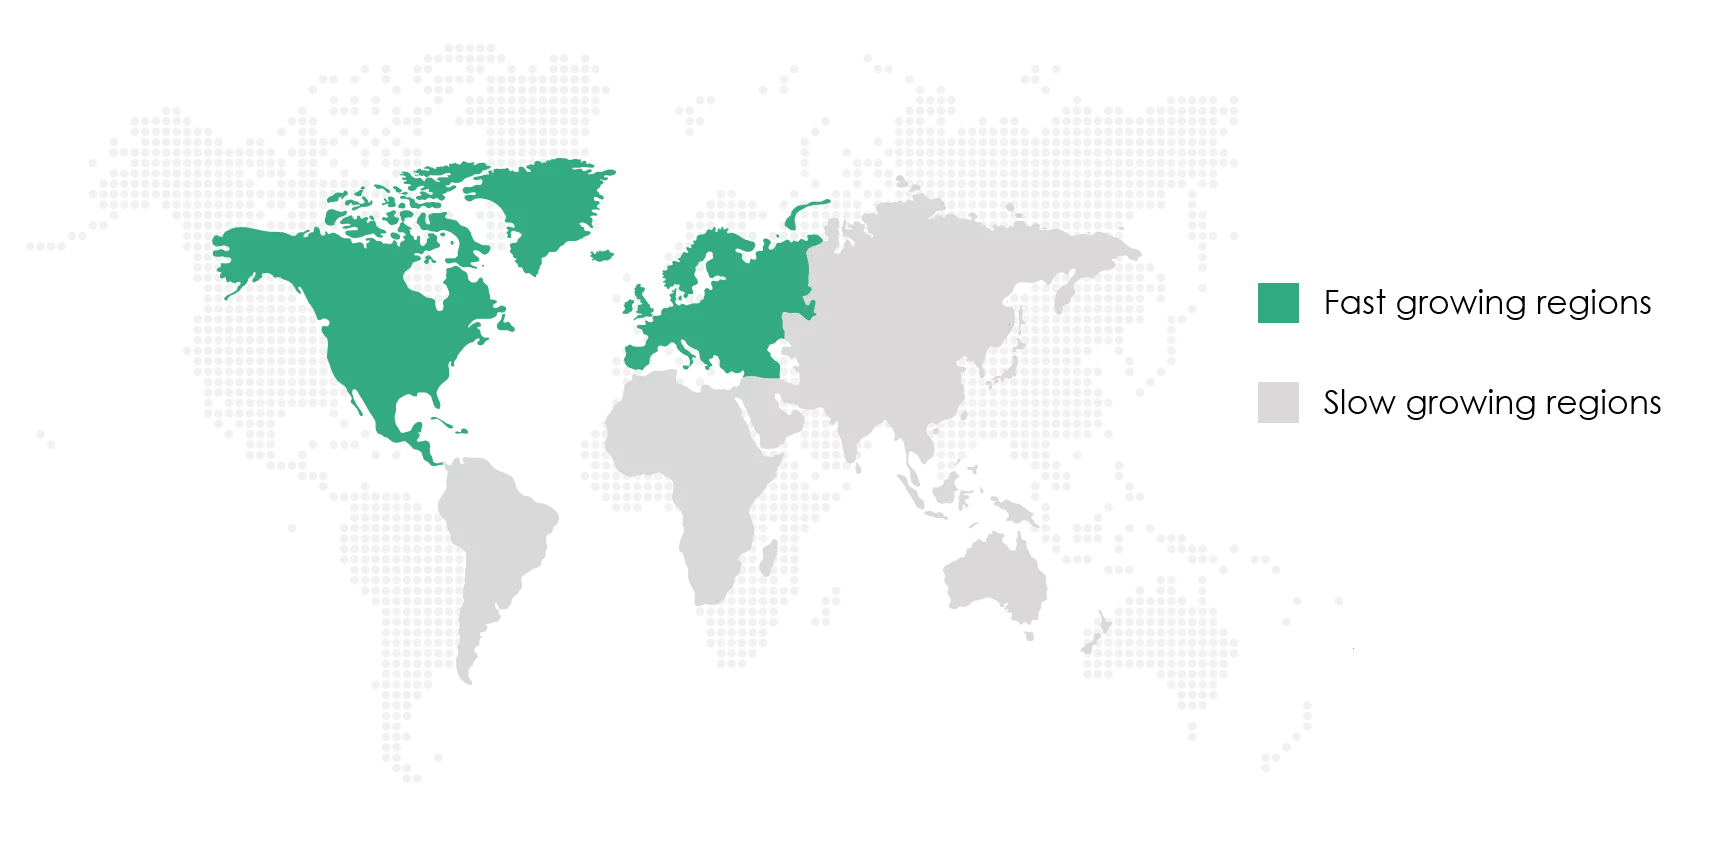 Infection-Control-Market-Share-by-Geography